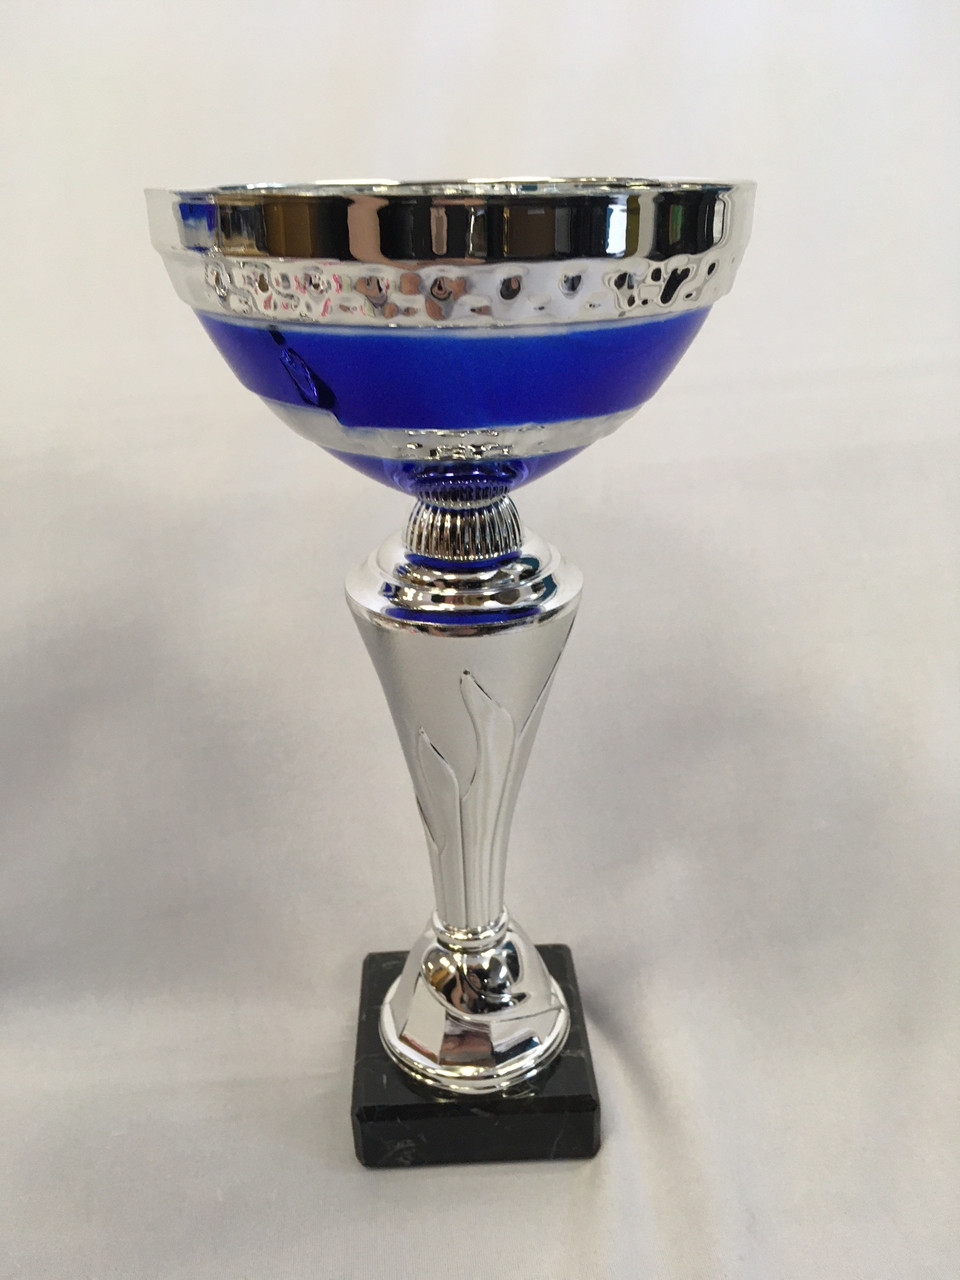 Multisport Silver & Blue Cup Award Free Engraving